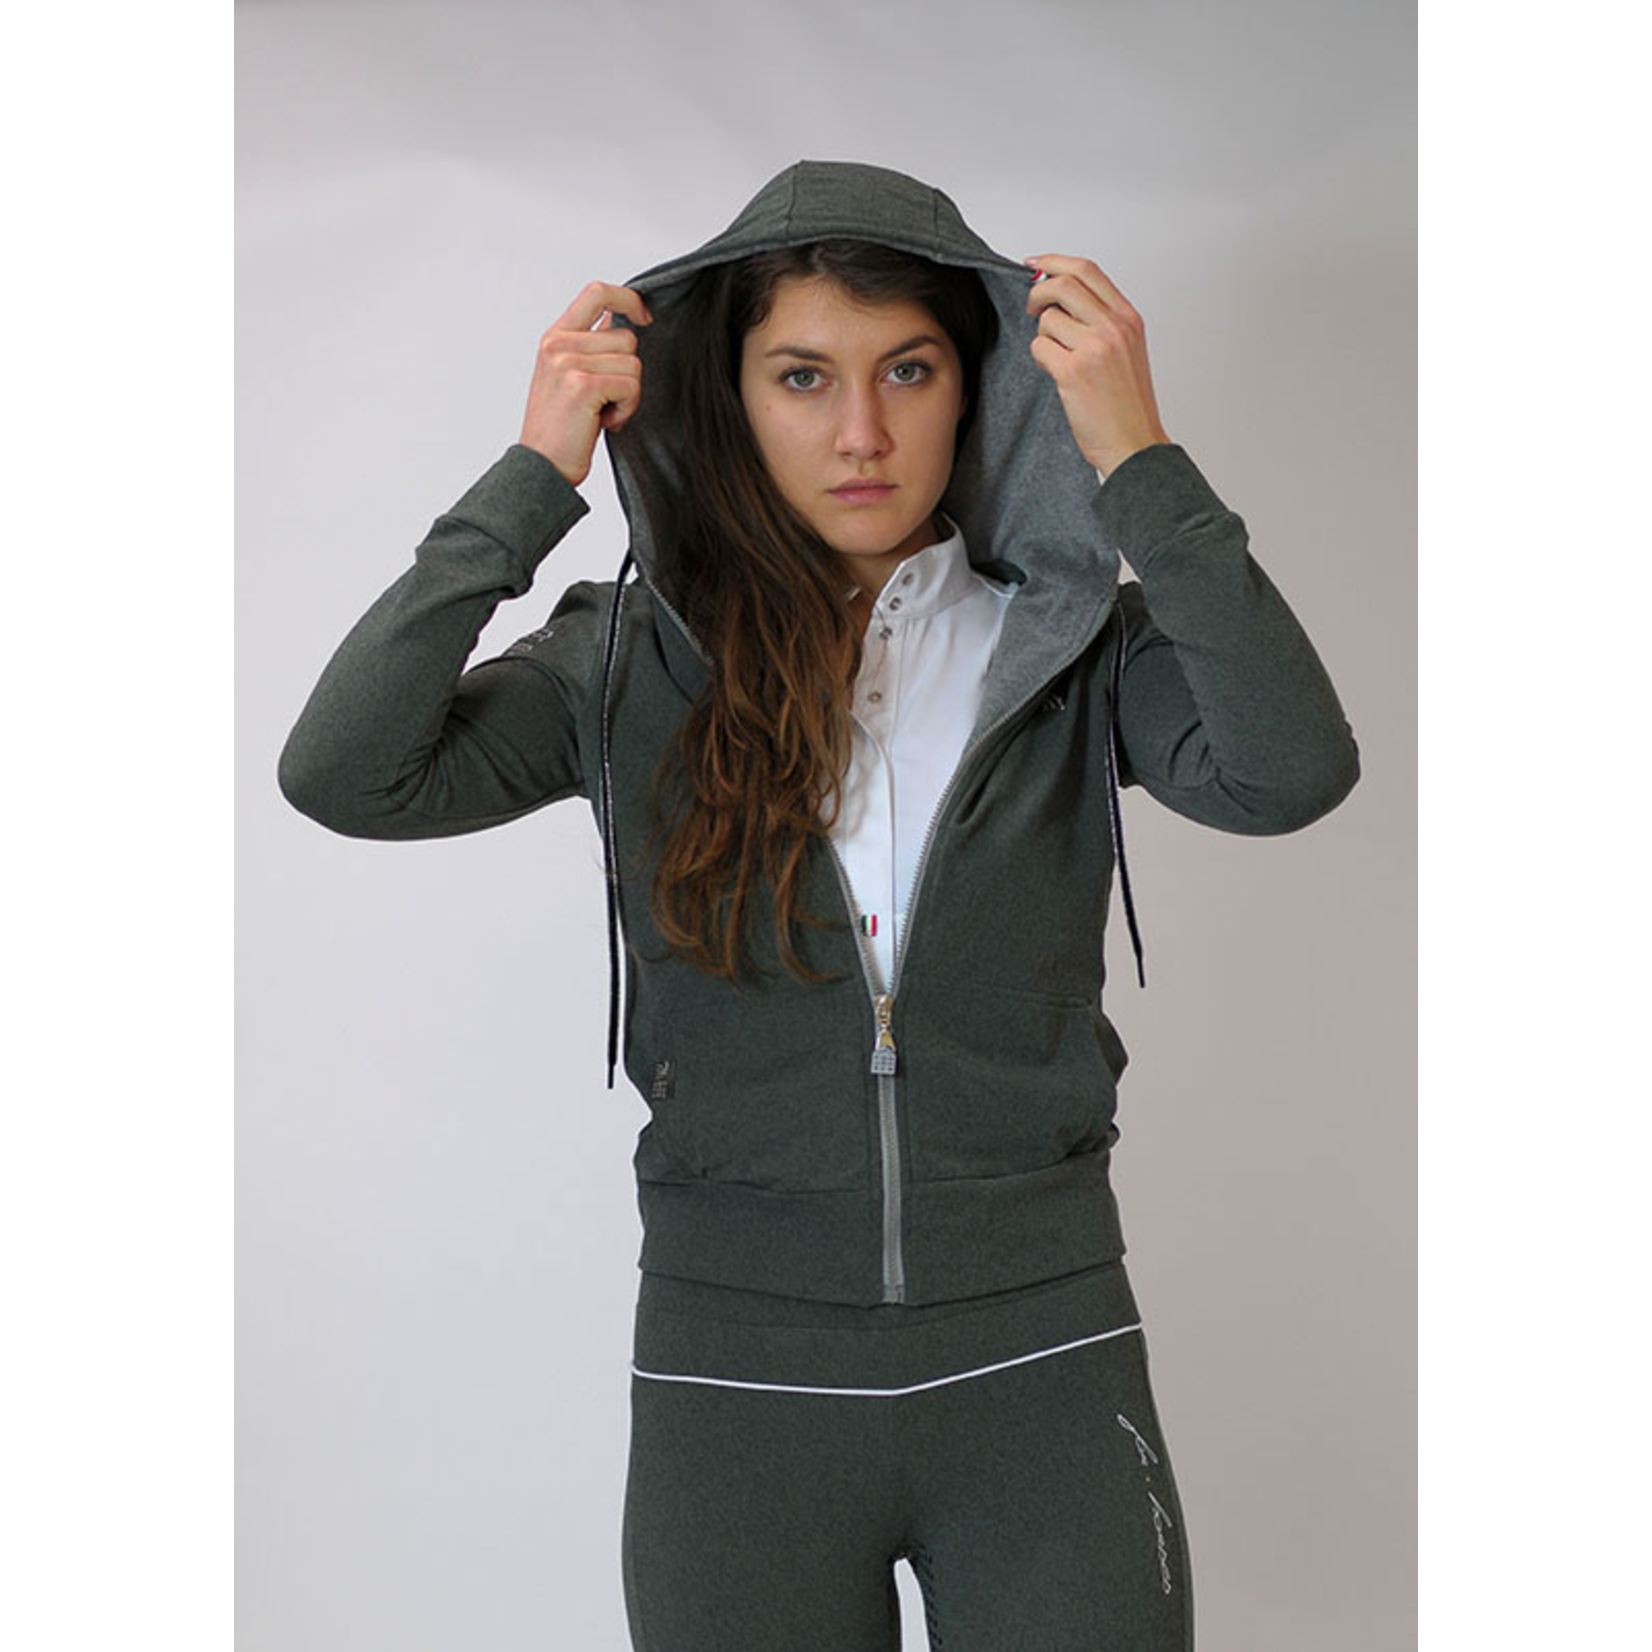 For Horses Maggy Hoodie - RIDE